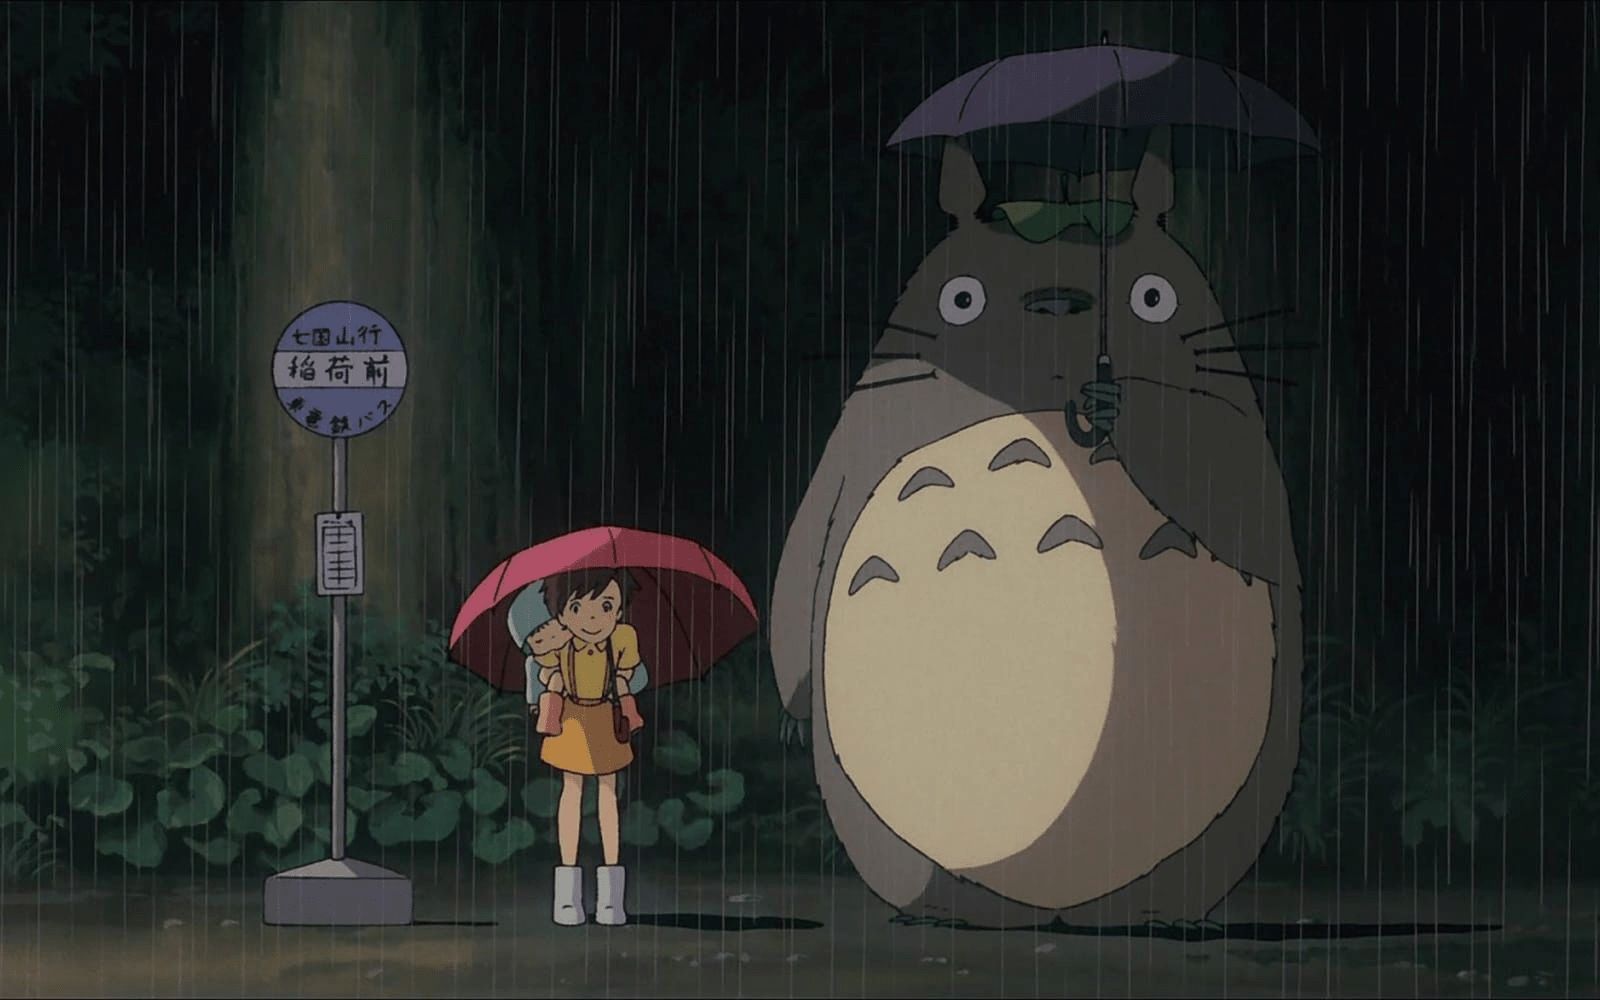 3 Must-See Studio Ghibli Anime Films for Newcomers